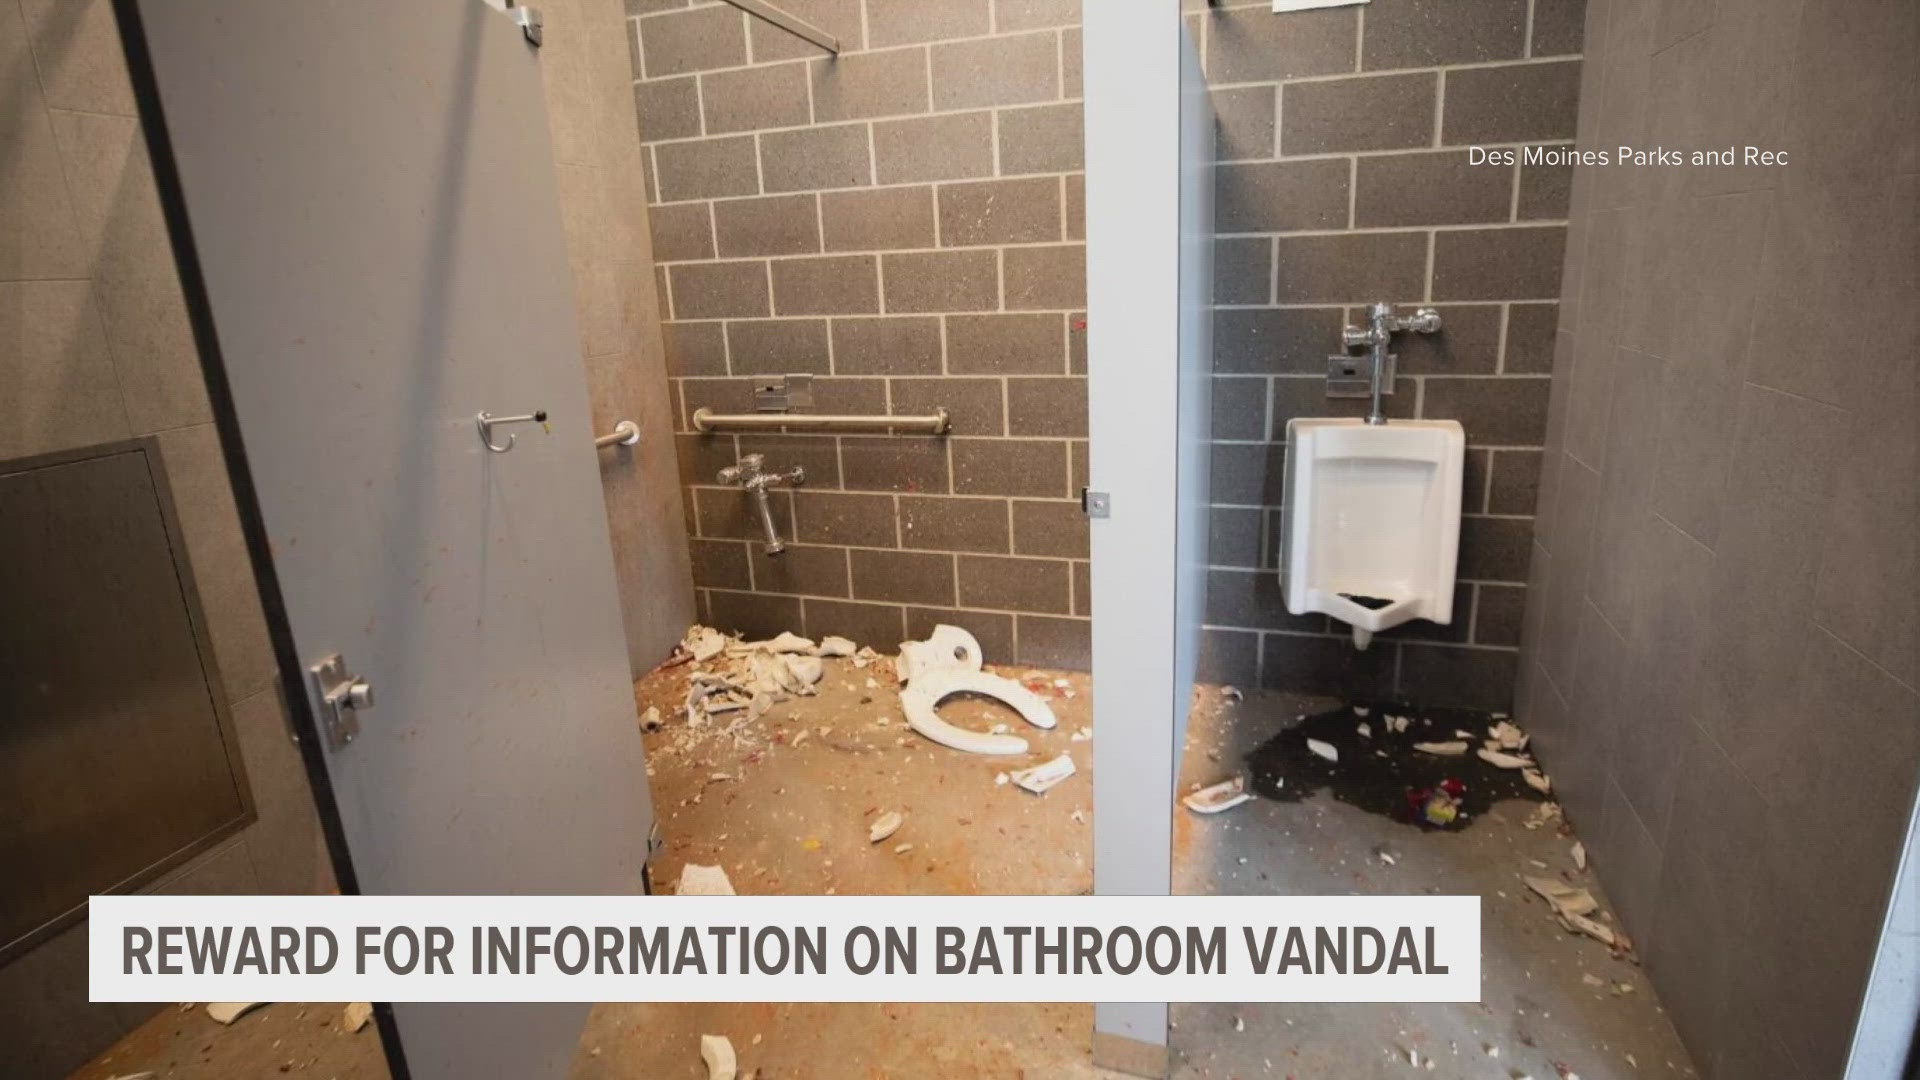 The new restrooms were "severely vandalized" according to a press release.